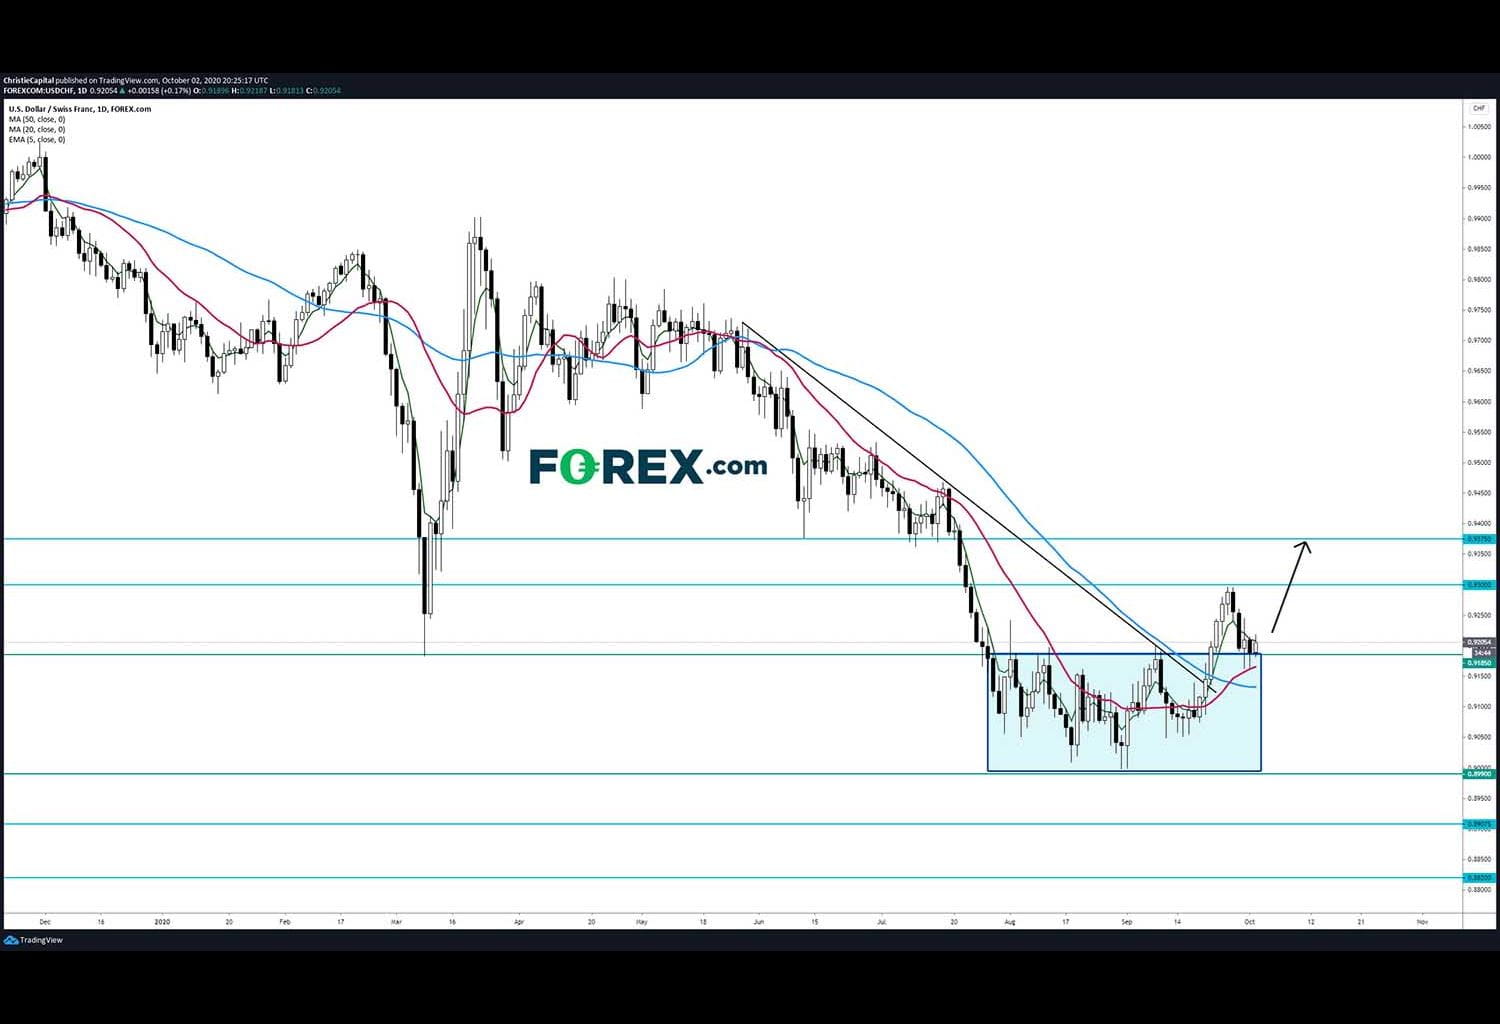 Market chart tracking USD to CHF. Published in October 2020 by FOREX.com